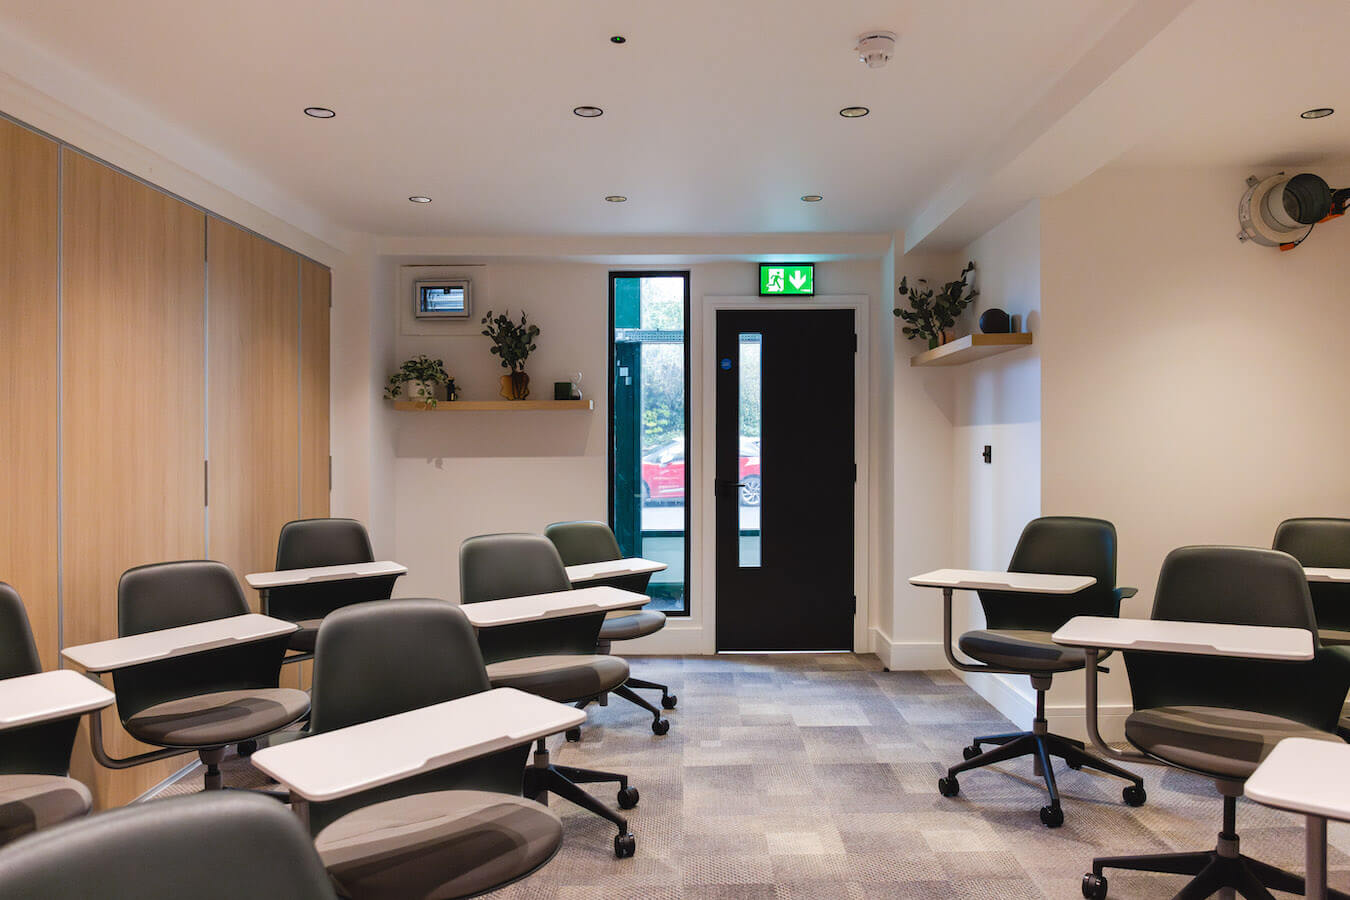 Steelcase Node chairs in an office training room in VSS's Liverpool office